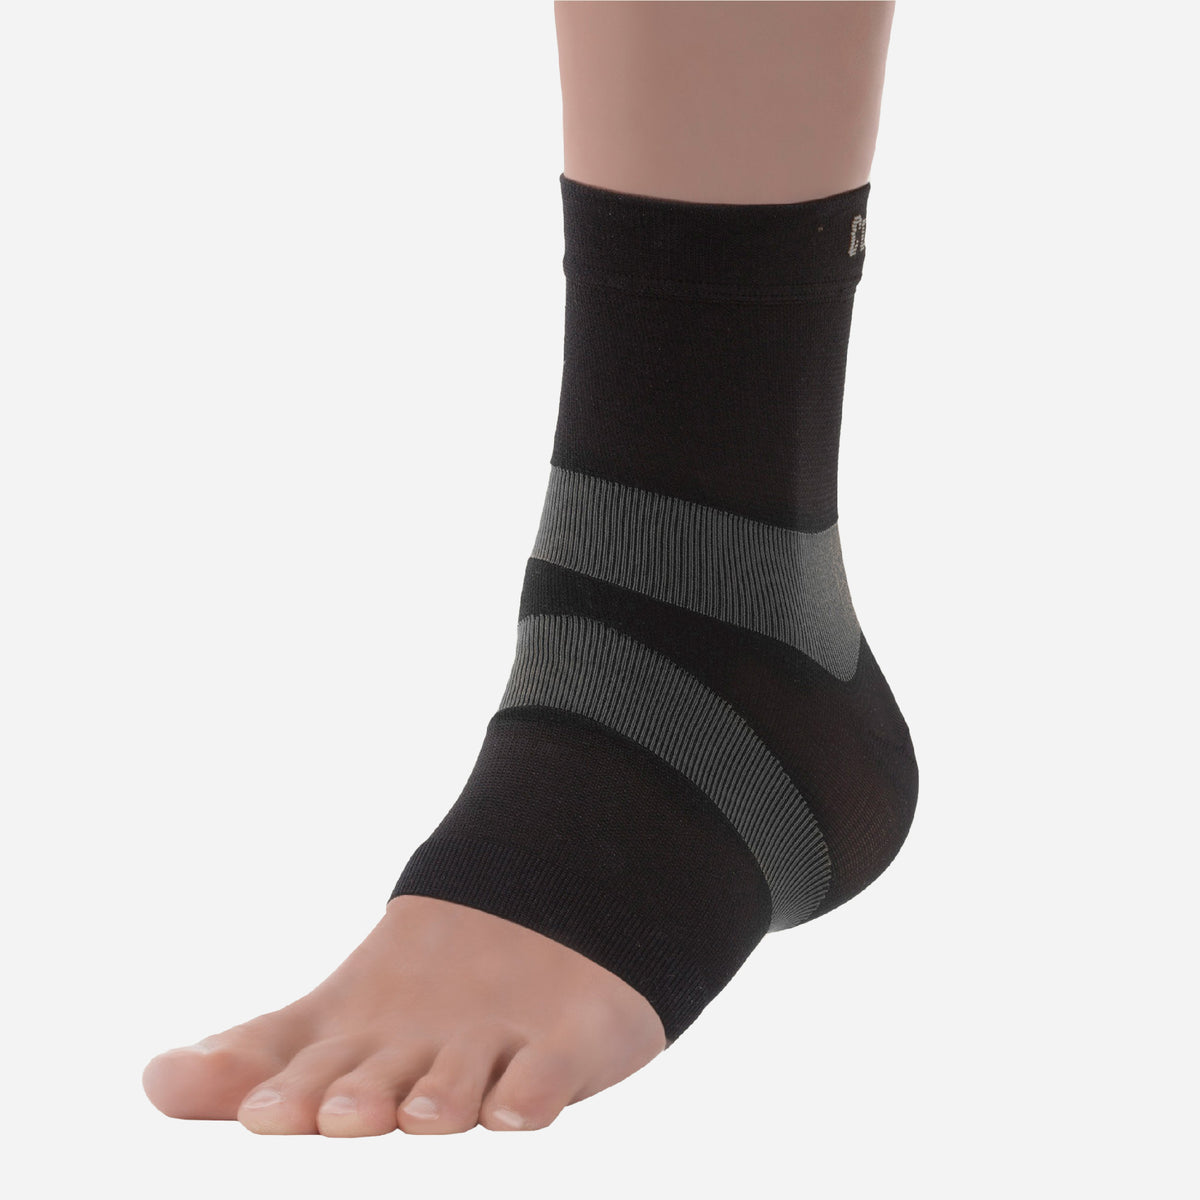 Ankle Compression Sleeve with Kinesiology Bands - Copper Fit